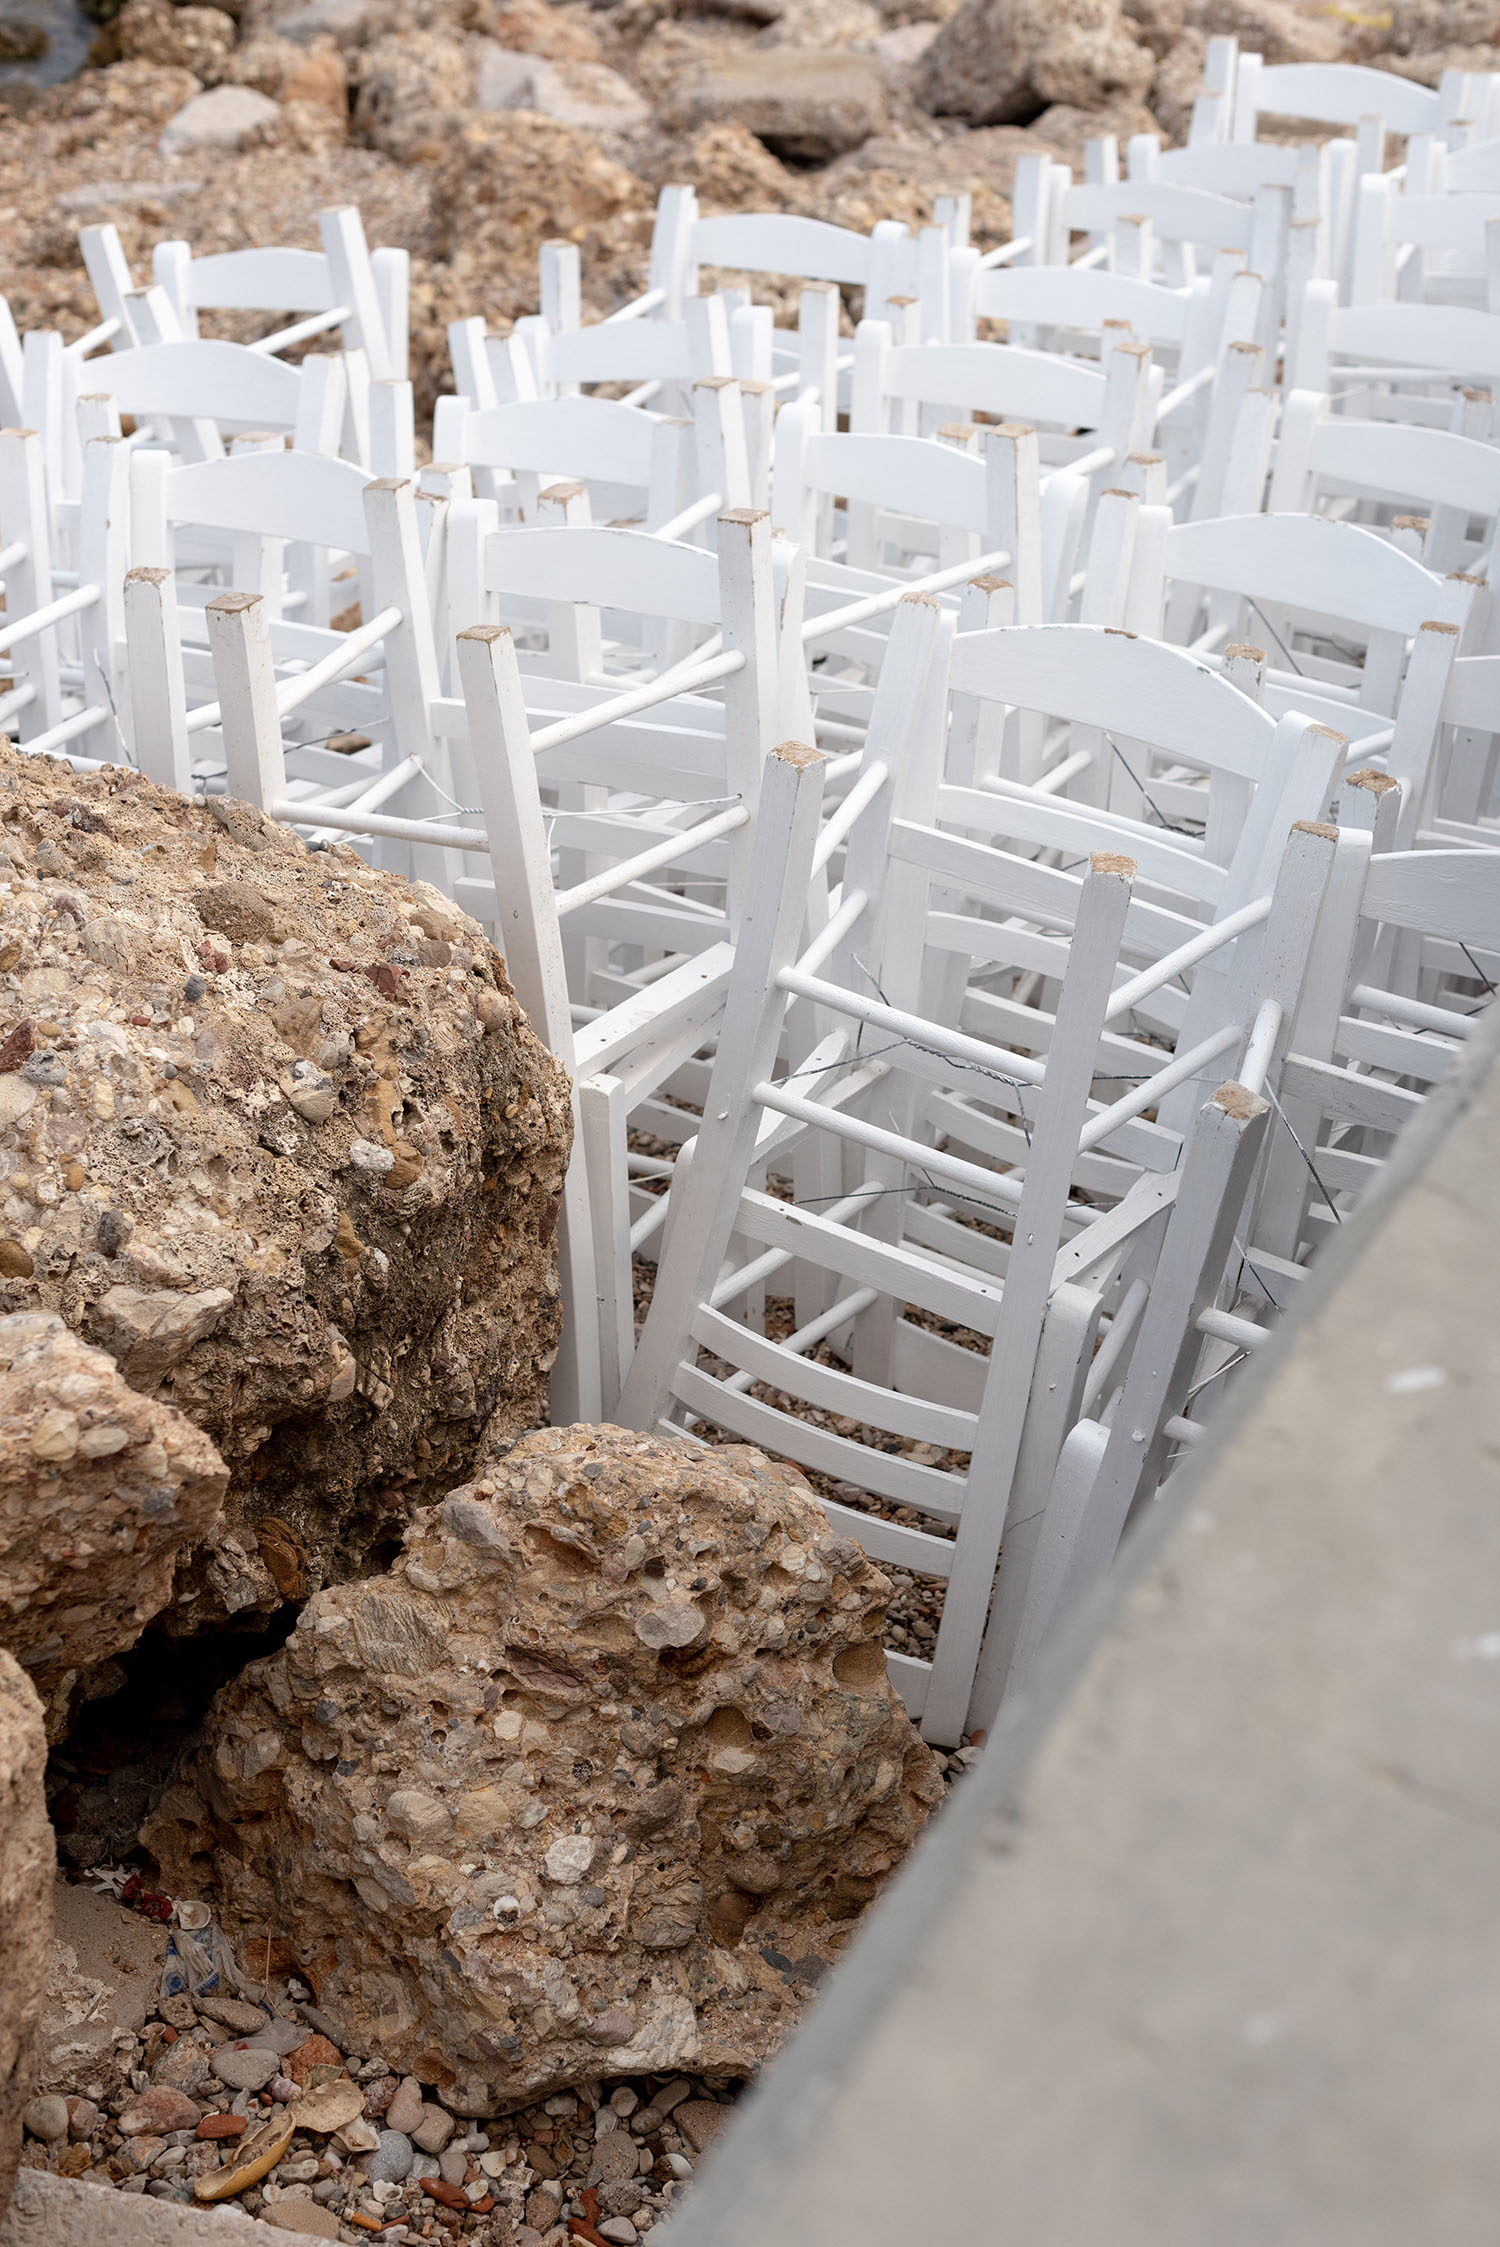 Coco & Vera - White restaurant chairs stacked on a rocky beach on Spetses Island in Greece